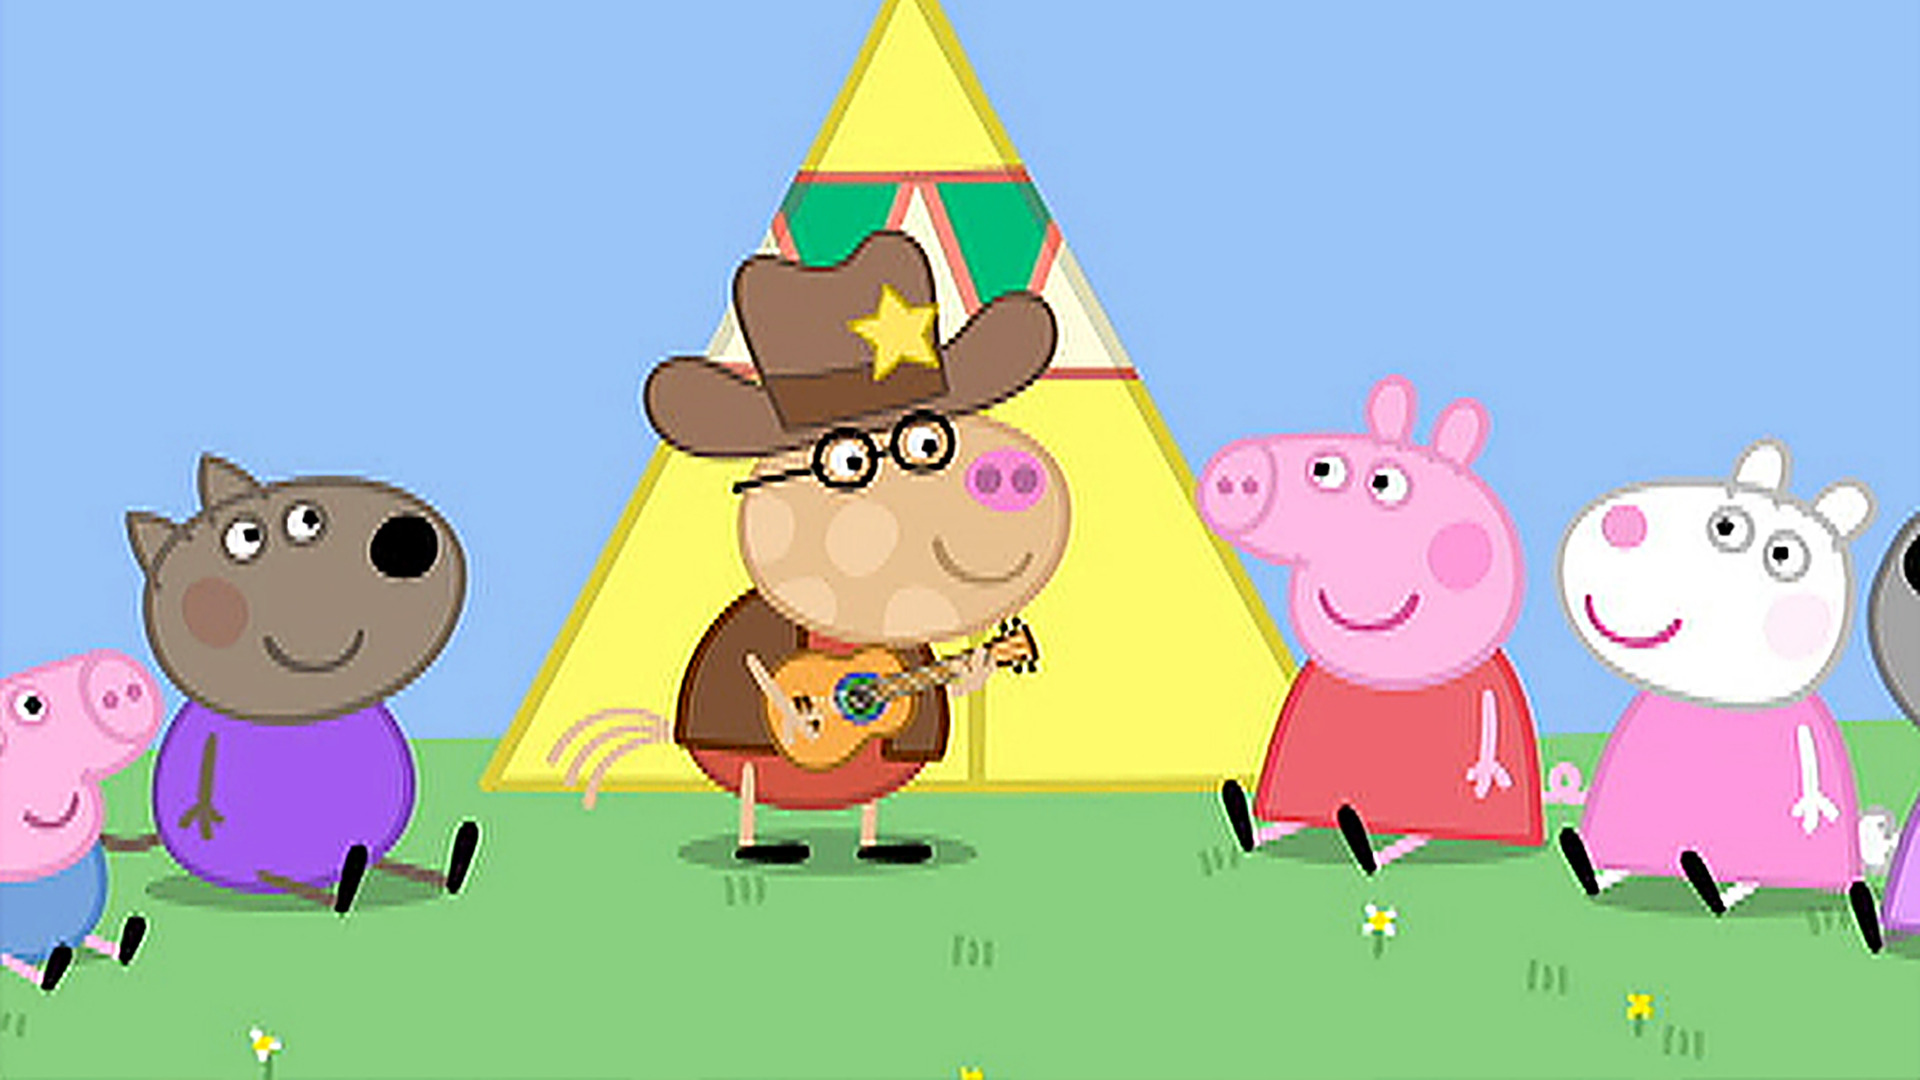 Watch Peppa Pig Season 5 Episode 5: Pedro the Cowboy/Grandpa Pig's Train to  the Rescue/Spider Web/Wishing Well/Lost Keys - Full show on Paramount Plus